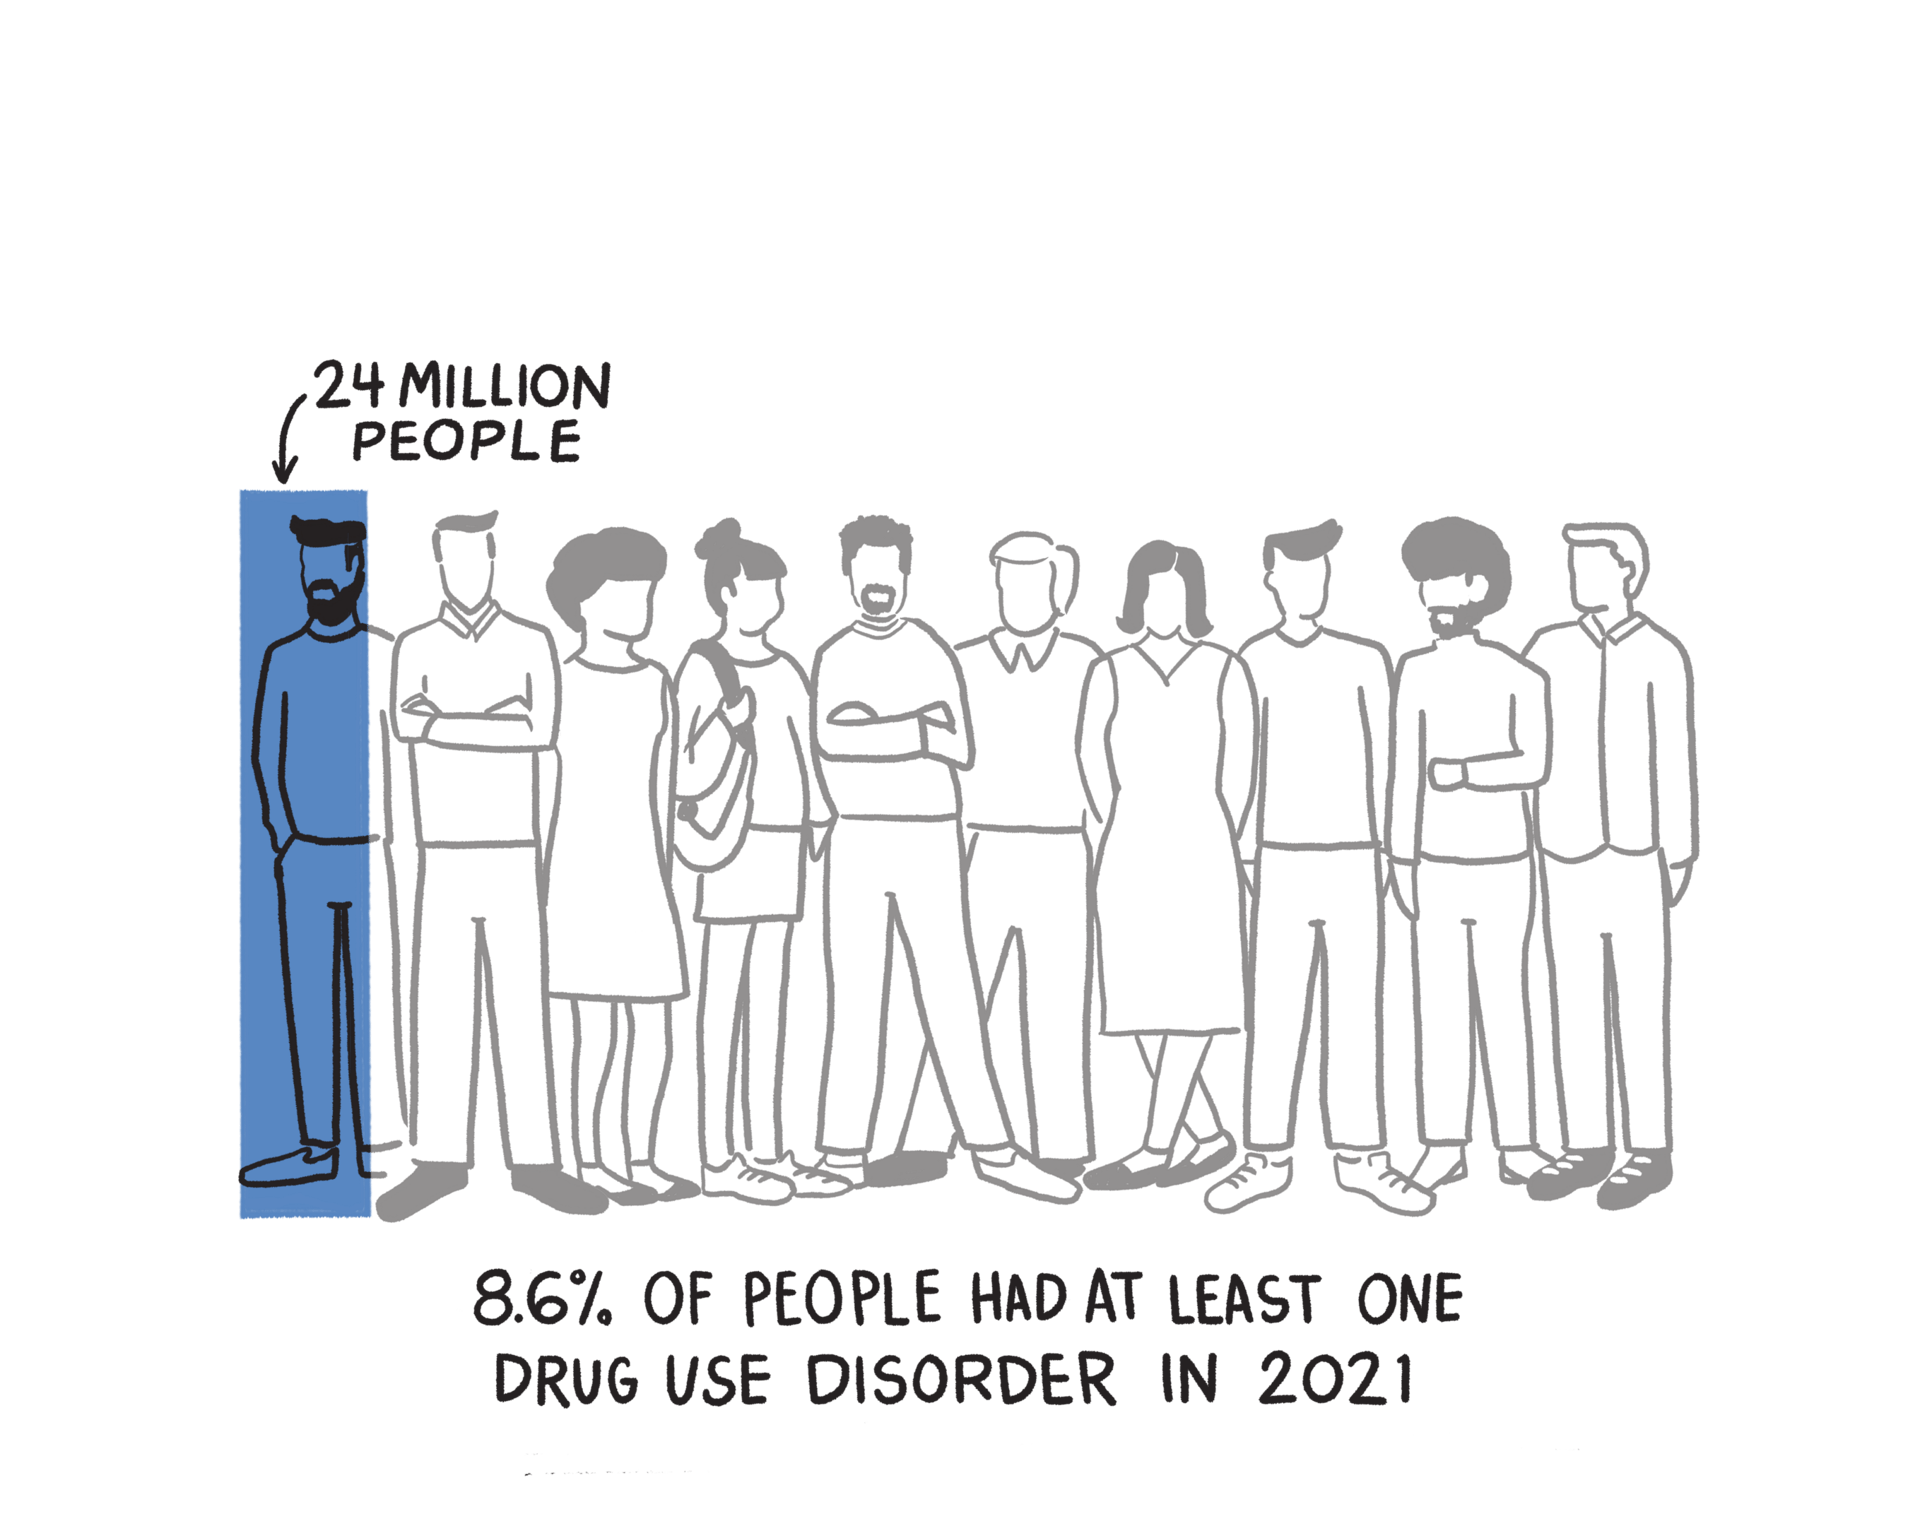 Bar char with silhouettes of ten people in the background. The caption reads 8.6% of people had at least one drug use disorder in 2021. That is equal to 24 million people.